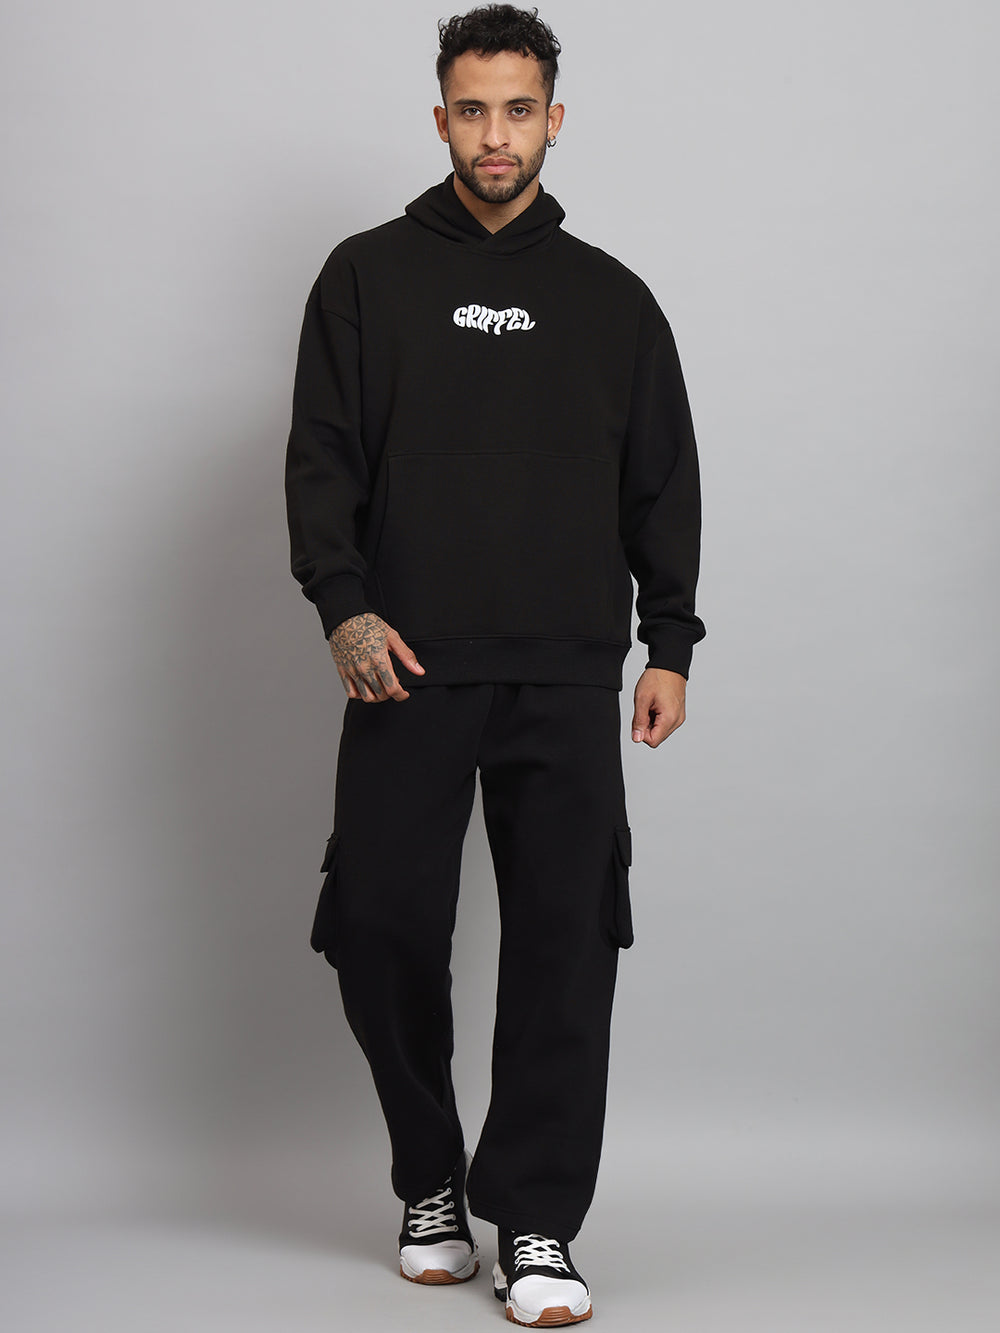 Griffel Men Oversized Fit Absent Minded Print 100% Cotton Black Fleece Hoodie and trackpant - griffel